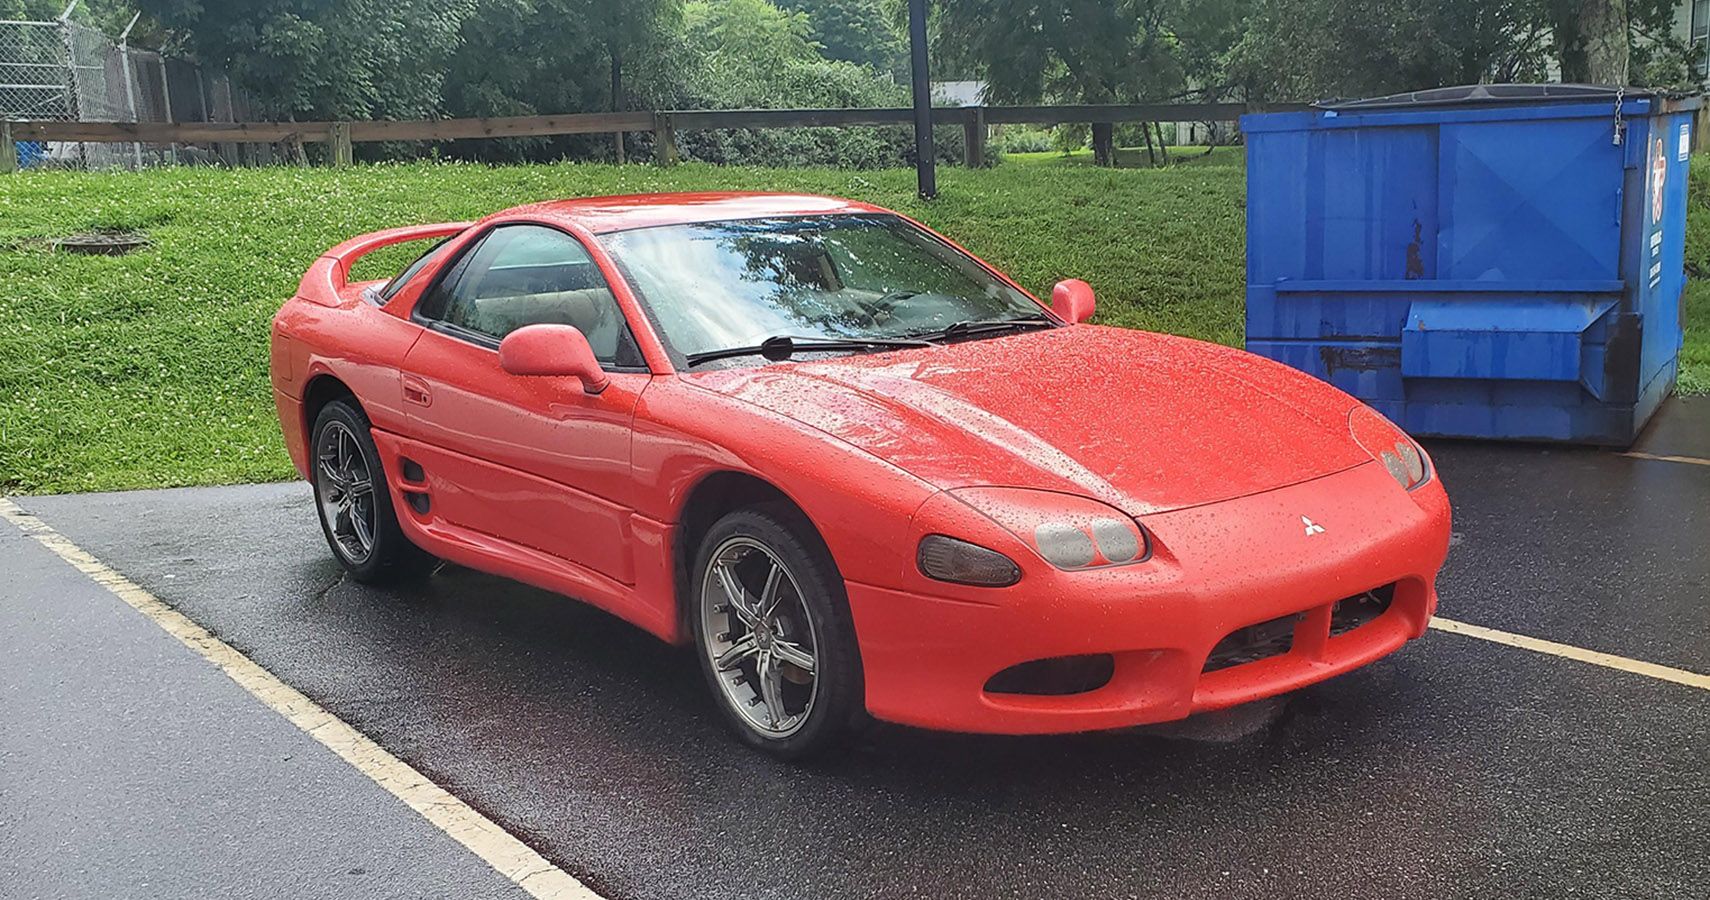 Red 1995 Mitsubishi 3000 GT parked